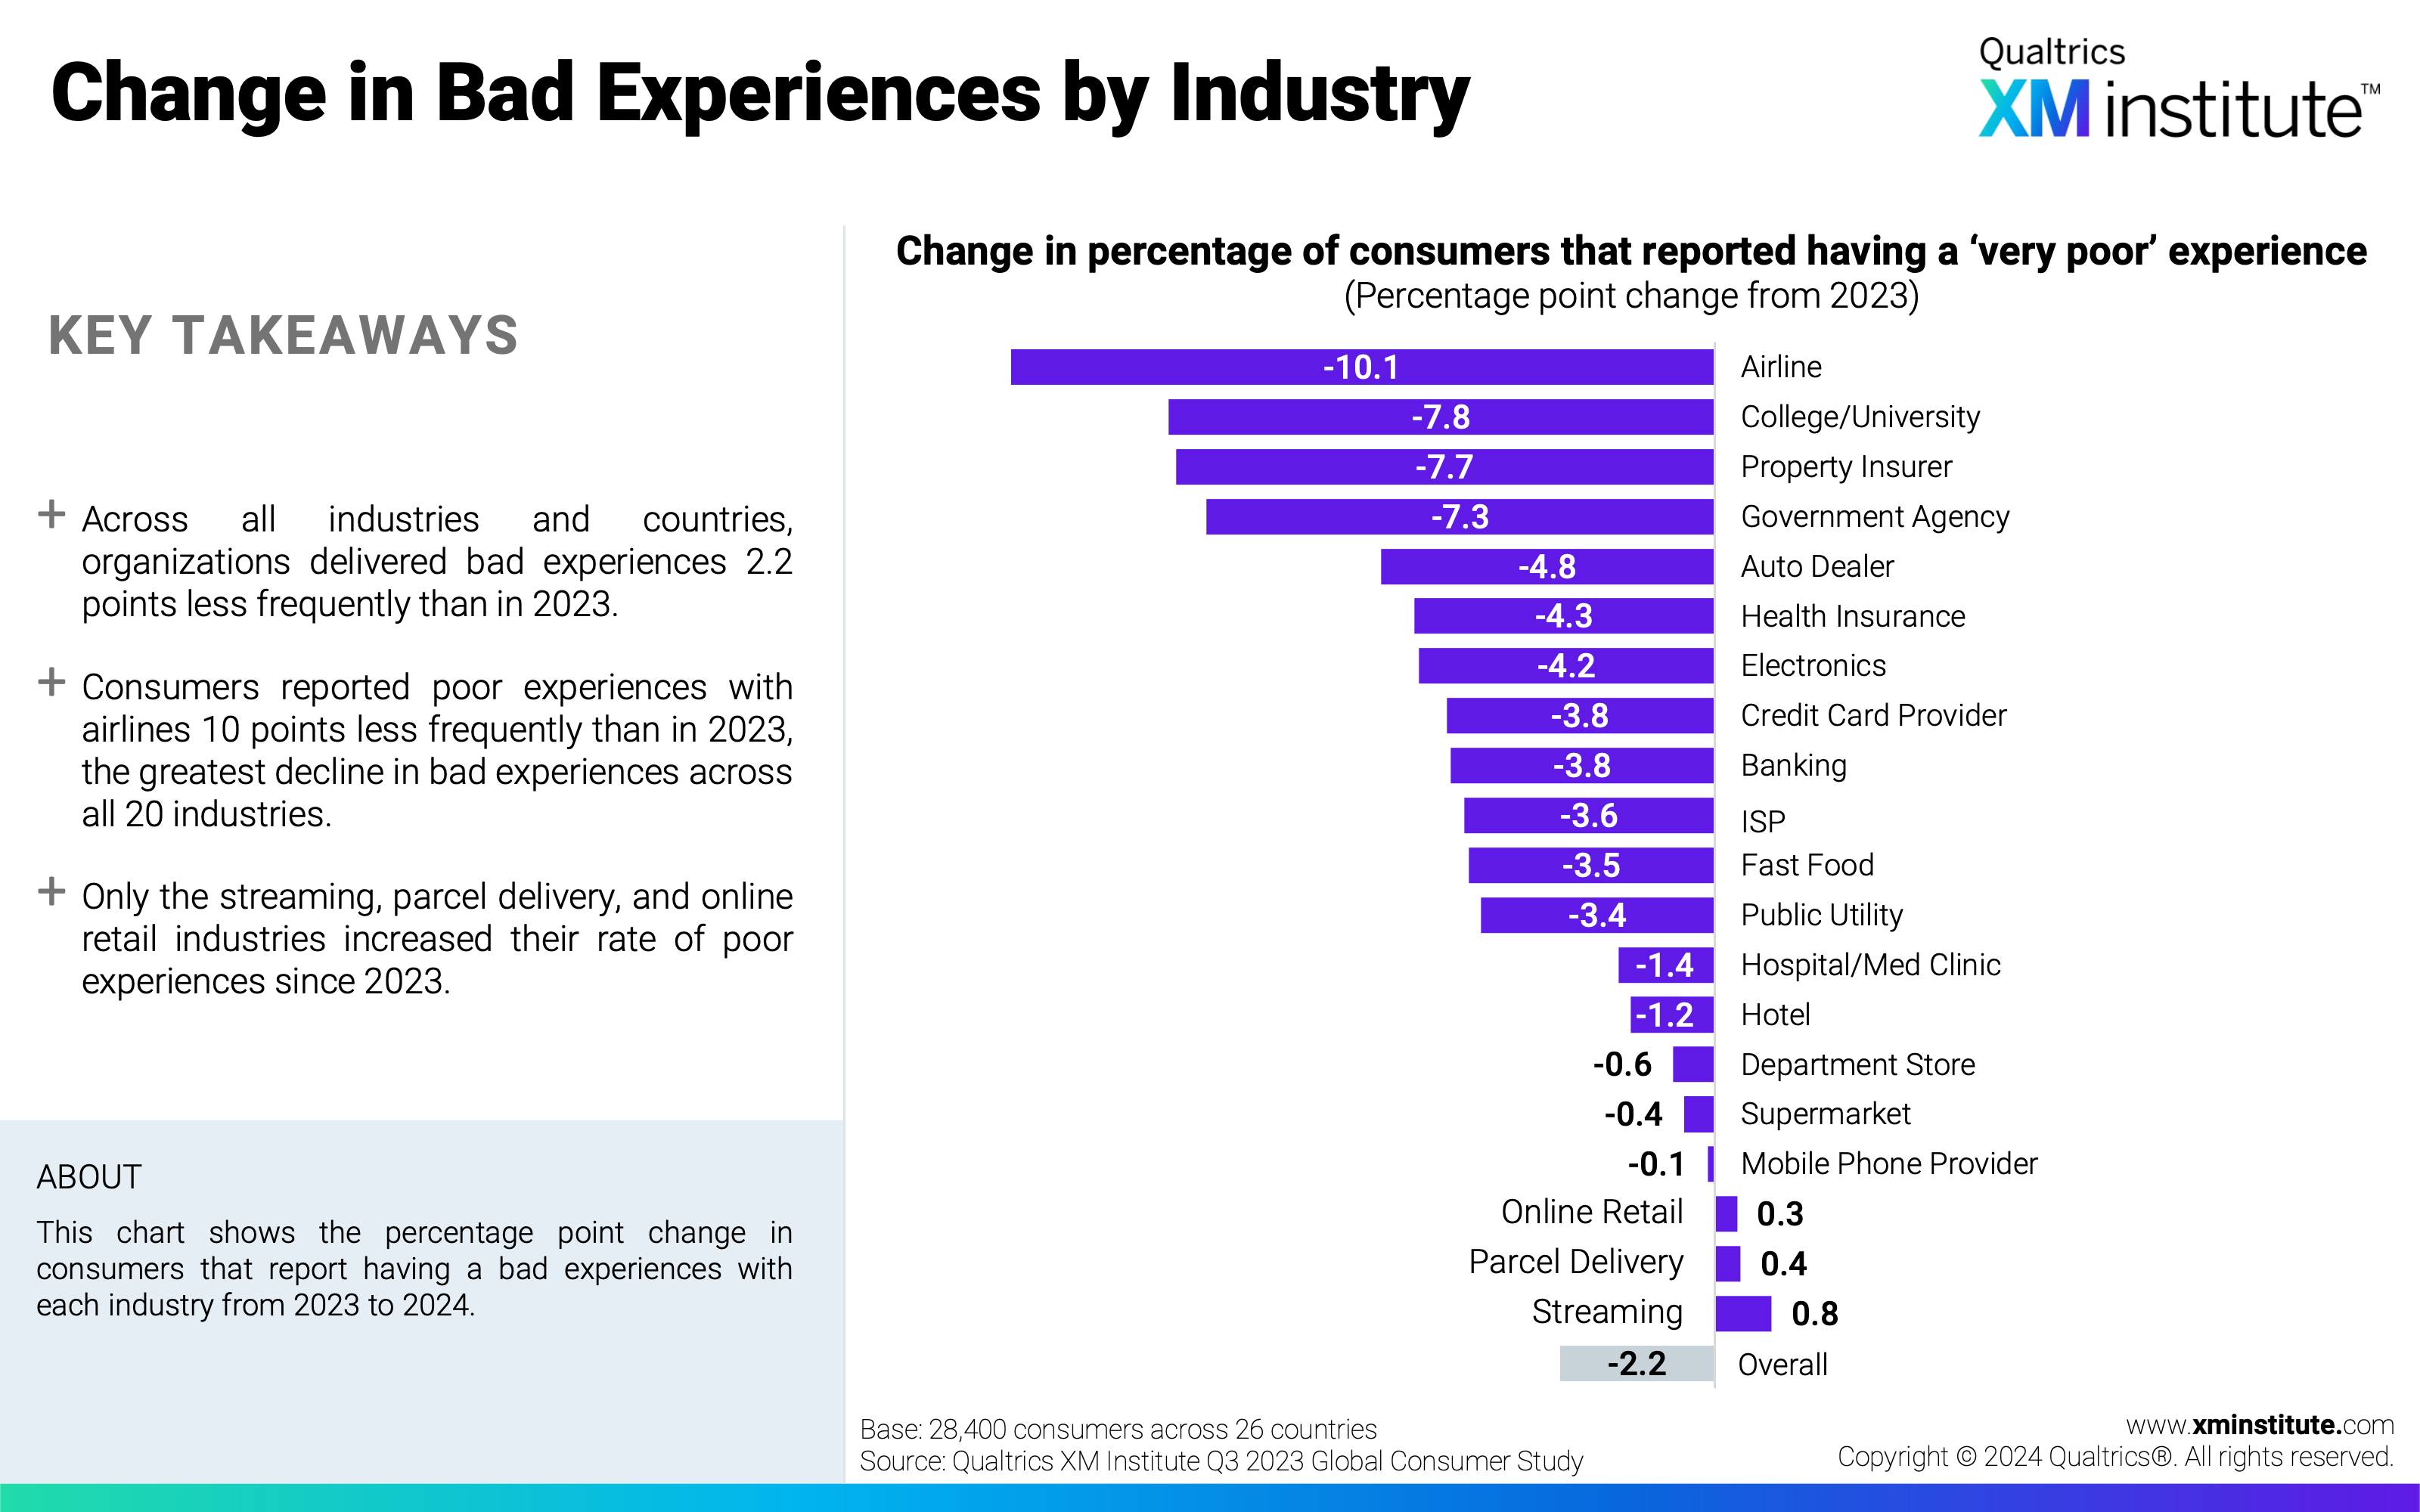 This chart shows the percentage point change in consumers that report having a bad experiences with each industry from 2023 to 2024. 